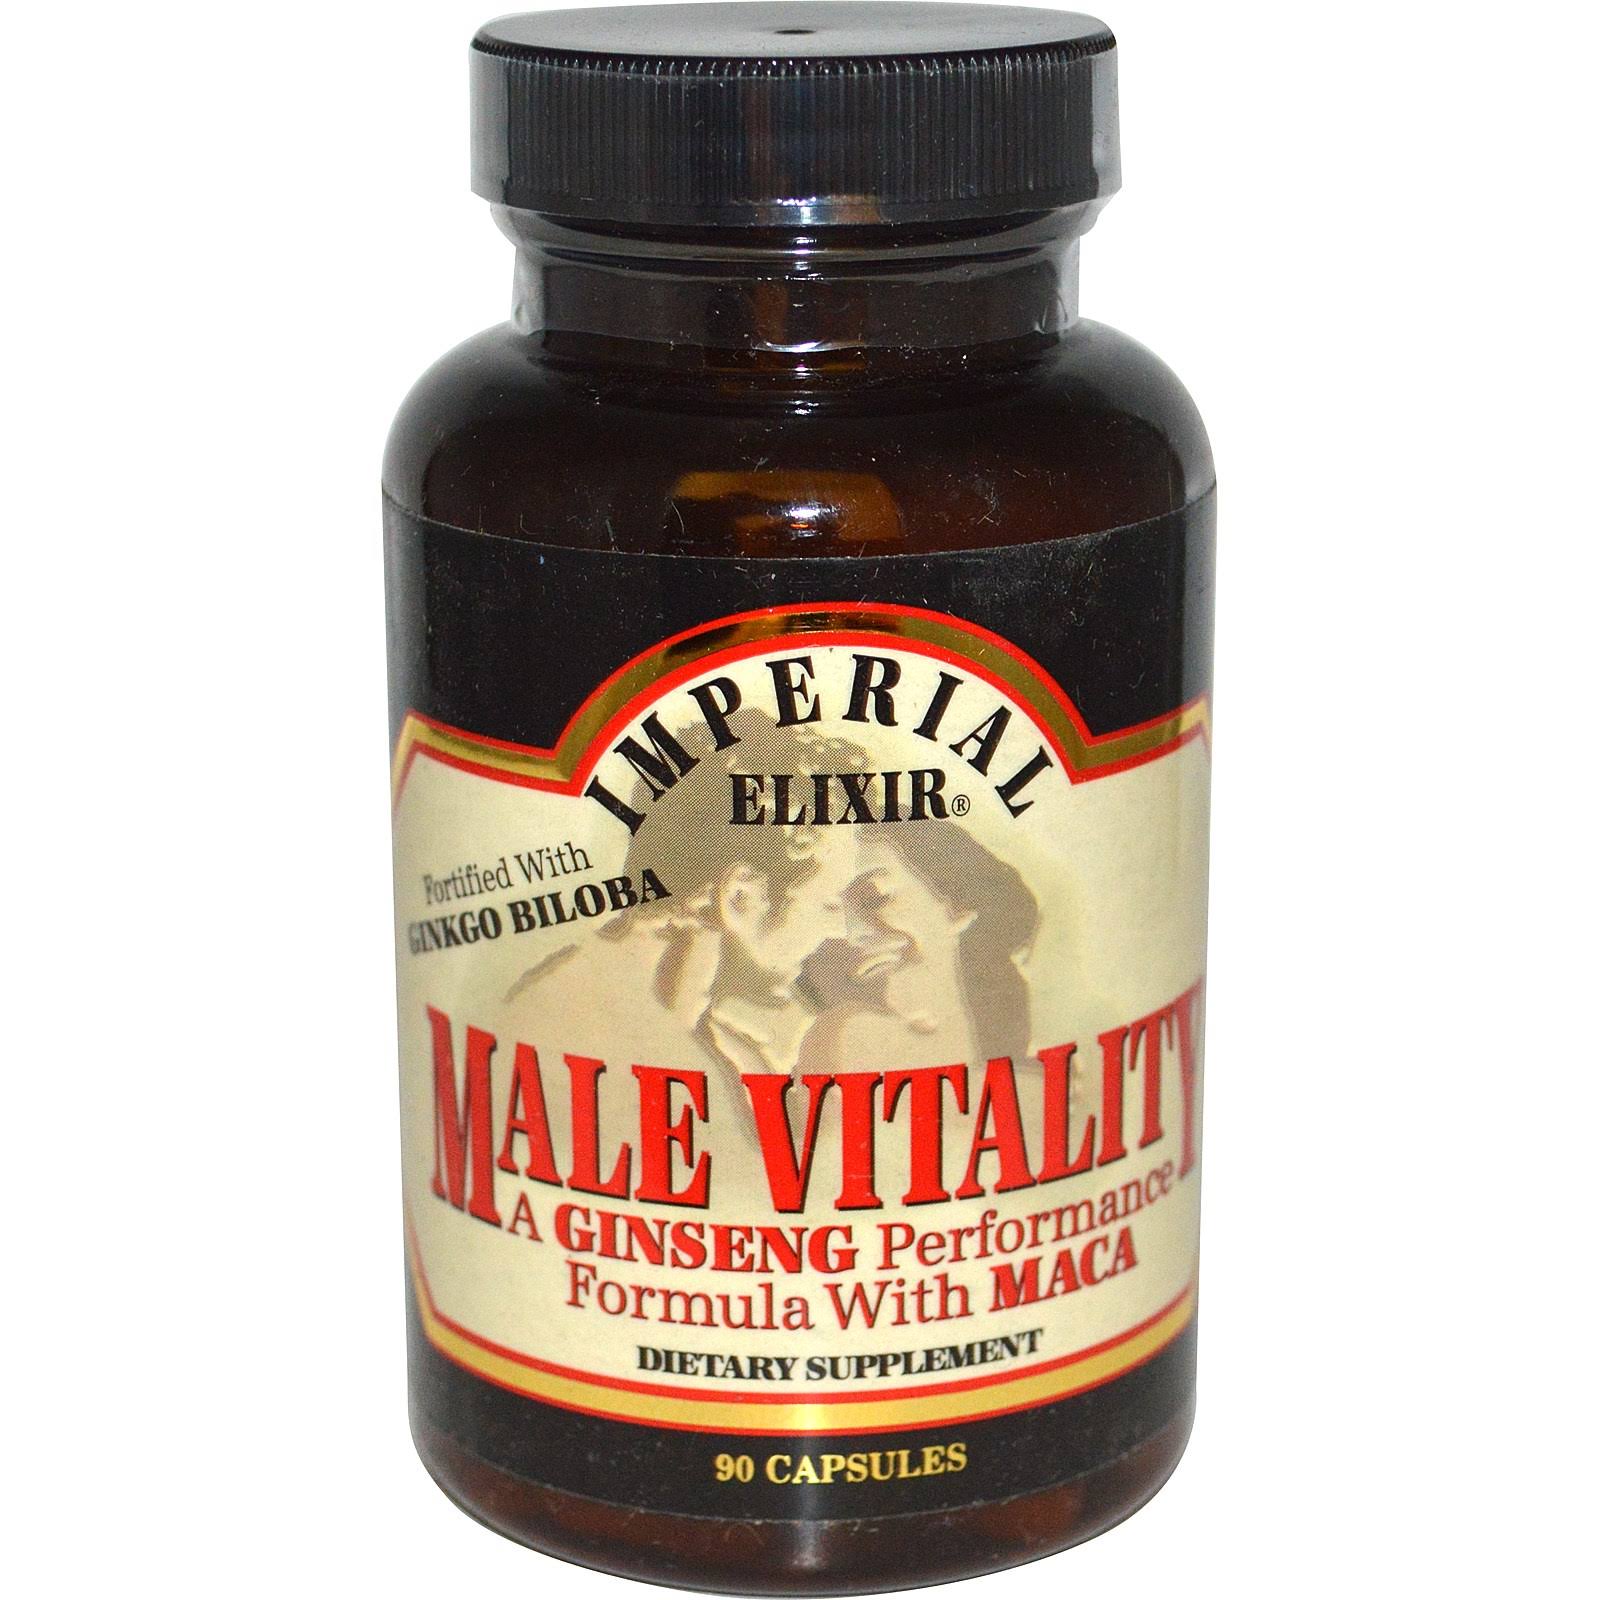 Imperial Elixir Male Vitality A Ginseng Performance Formula Supplement - 90ct